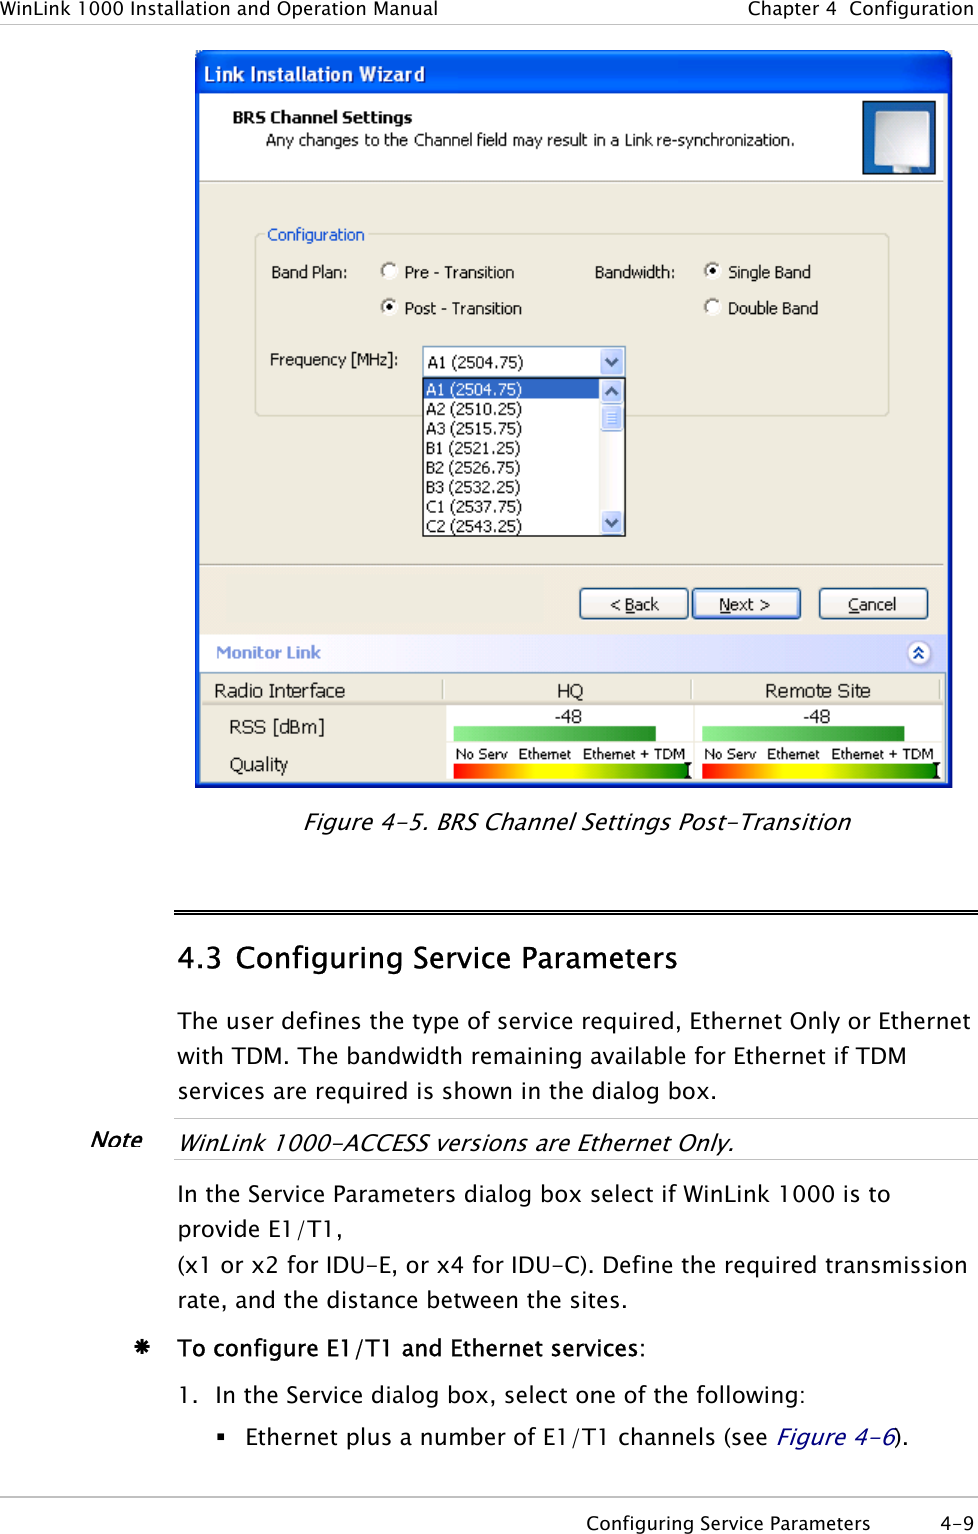 WinLink 1000 Installation and Operation Manual  Chapter  4  Configuration  Figure  4-5. BRS Channel Settings Post-Transition 4.3 Configuring Service Parameters The user defines the type of service required, Ethernet Only or Ethernet with TDM. The bandwidth remaining available for Ethernet if TDM services are required is shown in the dialog box.   WinLink 1000-ACCESS versions are Ethernet Only.  In the Service Parameters dialog box select if WinLink 1000 is to provide E1/T1,  (x1 or x2 for IDU-E, or x4 for IDU-C). Define the required transmission rate, and the distance between the sites.  NoteÆ To configure E1/T1 and Ethernet services: 1. In the Service dialog box, select one of the following:  Ethernet plus a number of E1/T1 channels (see Figure  4-6).   Configuring Service Parameters  4-9 